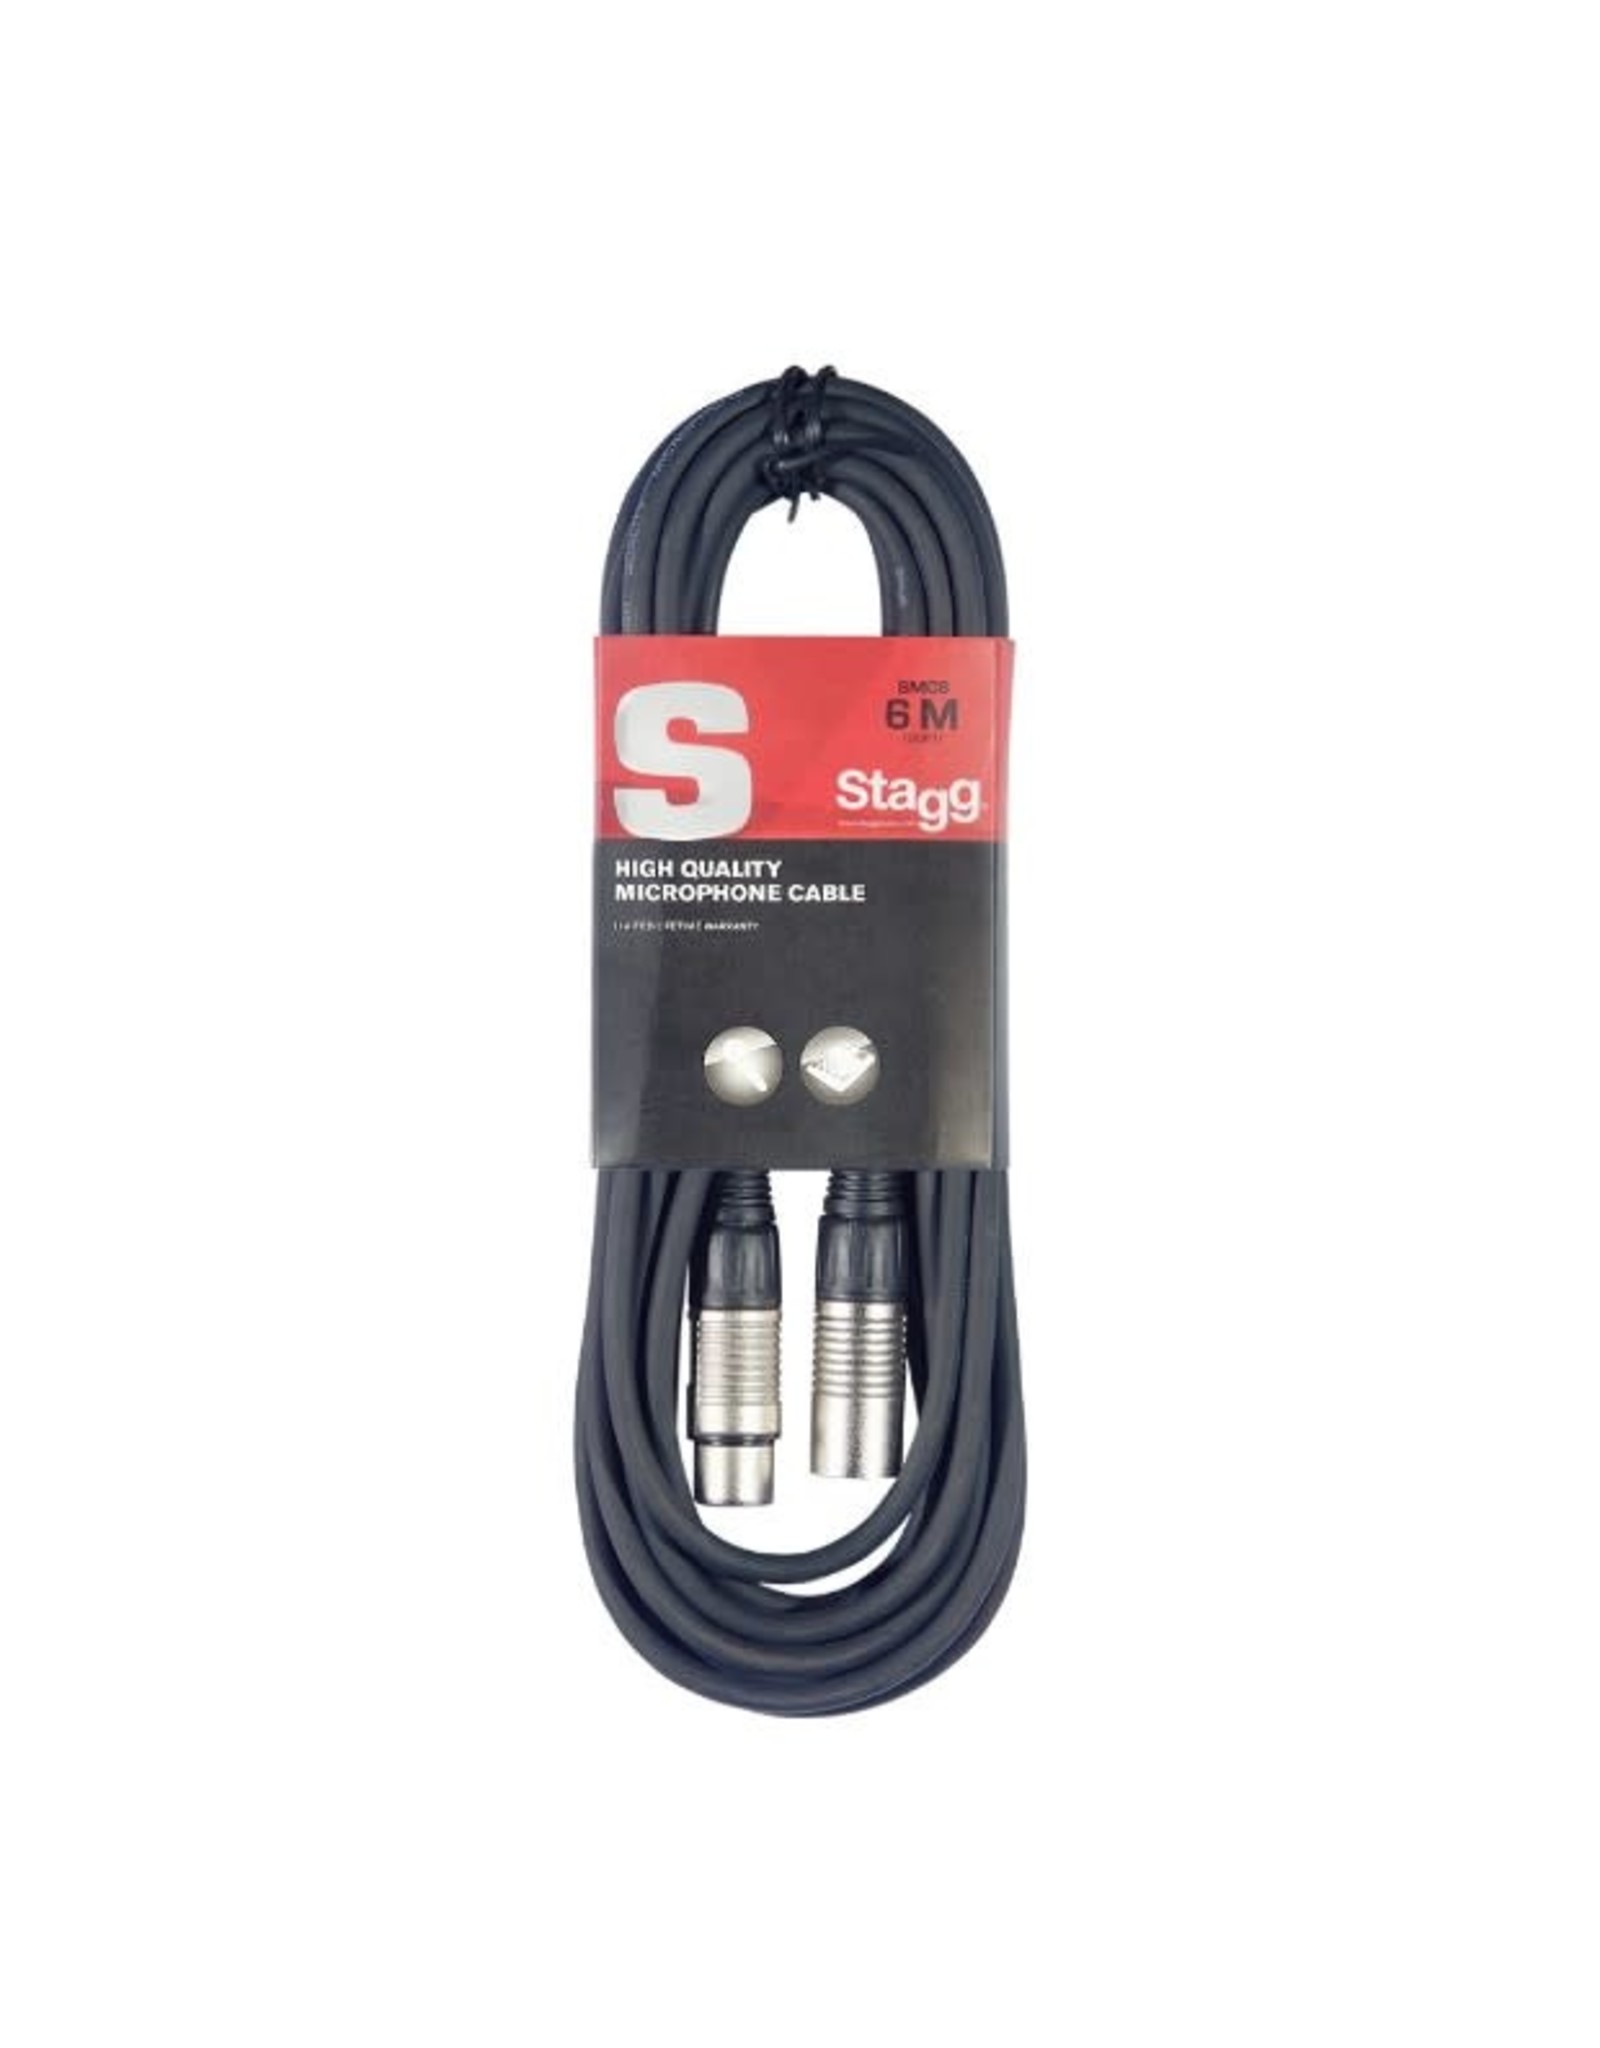 Stagg Stagg S-Series Microphone Cable XLR/XLR (m/f) 6M (20')